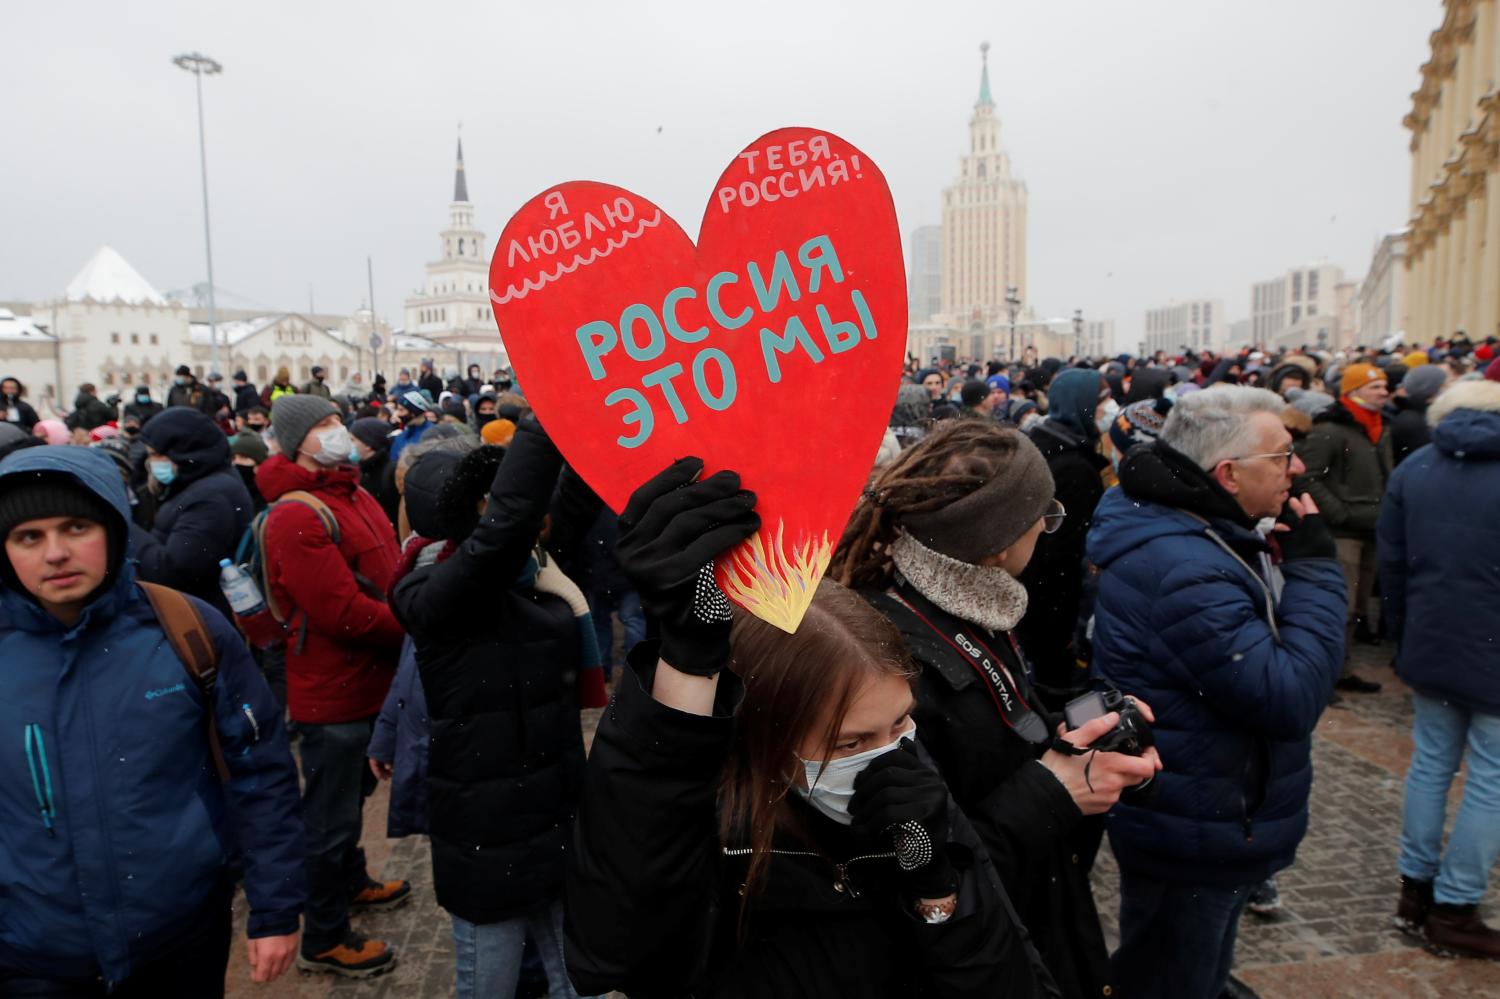 A protestor holds a heart-shaped sign reading "I love you, Russia! We are Russia!" during a rally in support of jailed Russian opposition leader Alexei Navalny in Moscow, Russia January 31, 2021. REUTERS/Maxim Shemetov